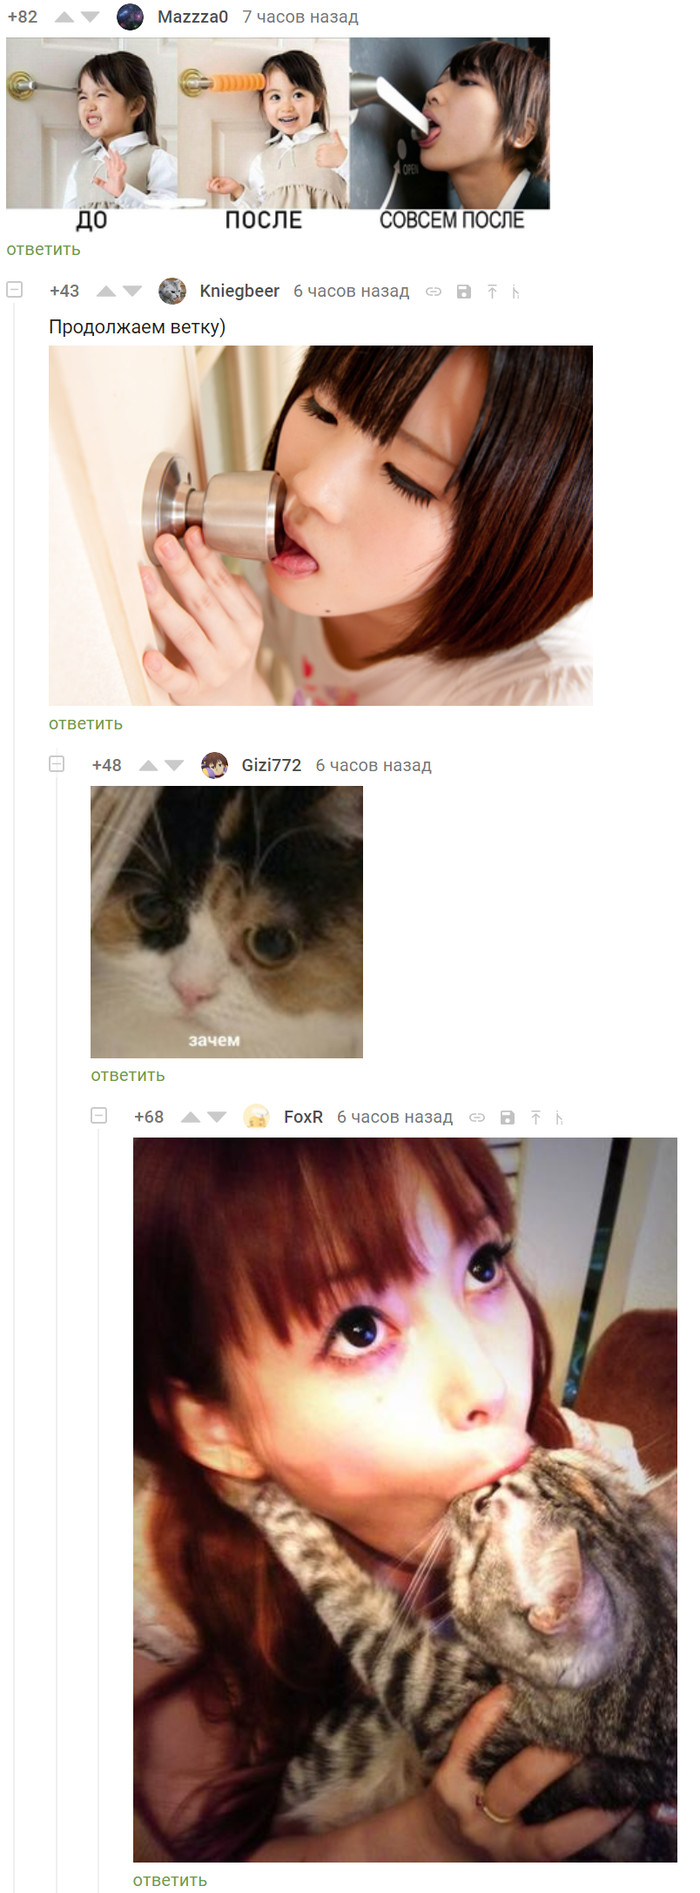 The cat has no more questions - Comments, Comments on Peekaboo, Screenshot, cat, Asian, Longpost